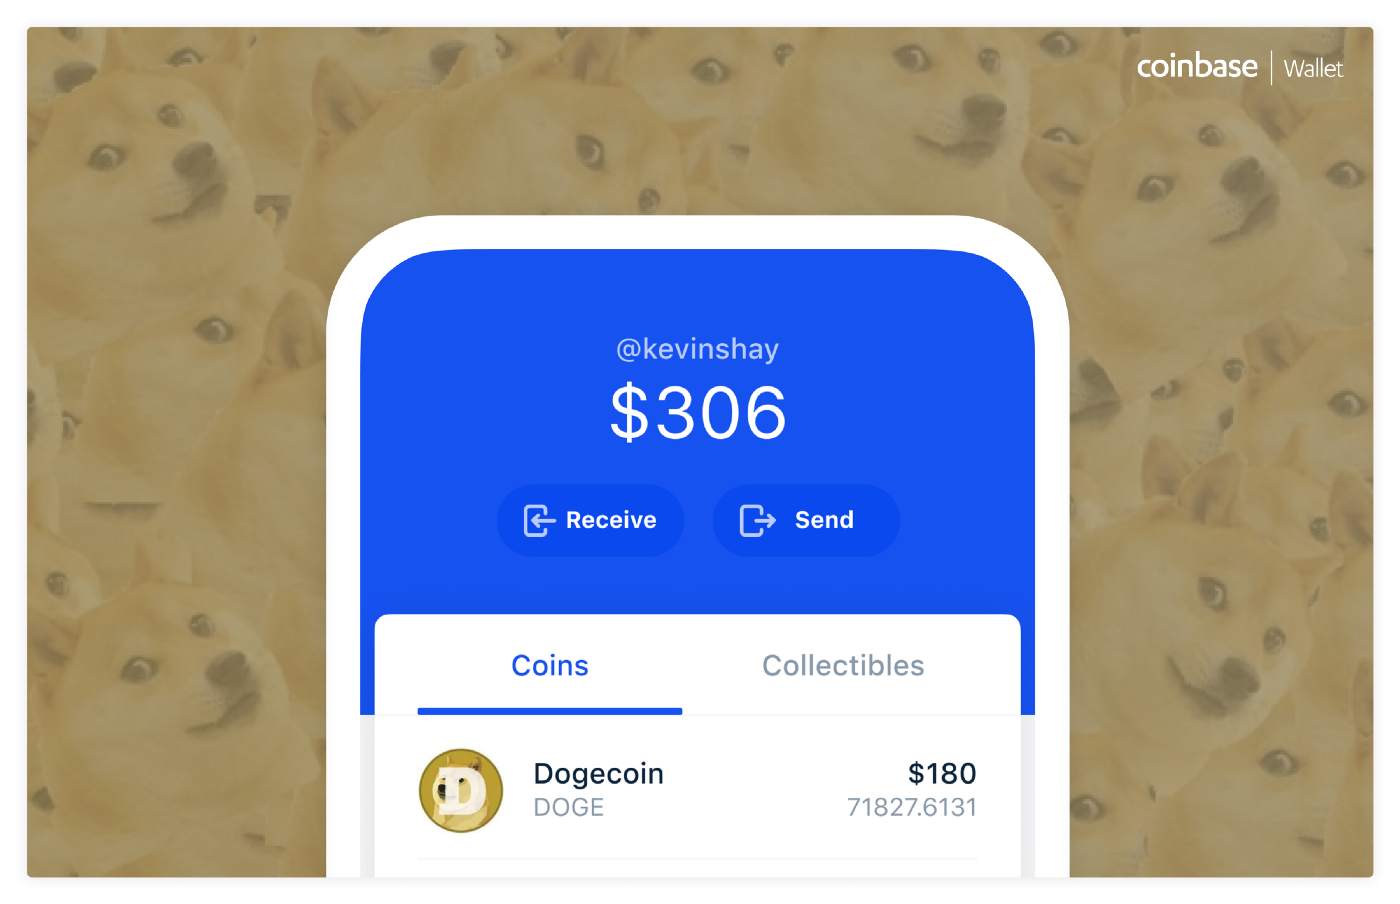 Guide on How to buy Dogecoin on Coinbase - QuintDaily